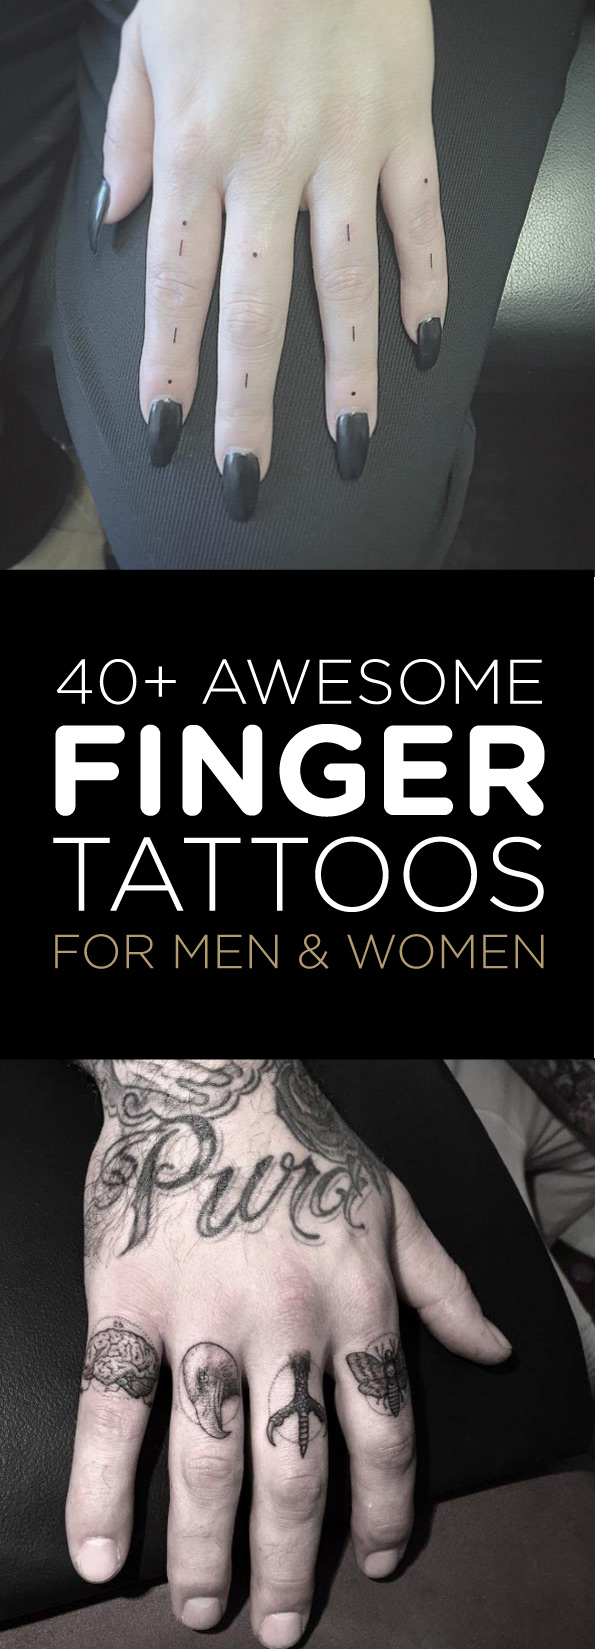 40+ Awesome Finger Tattoos For Men and Women 